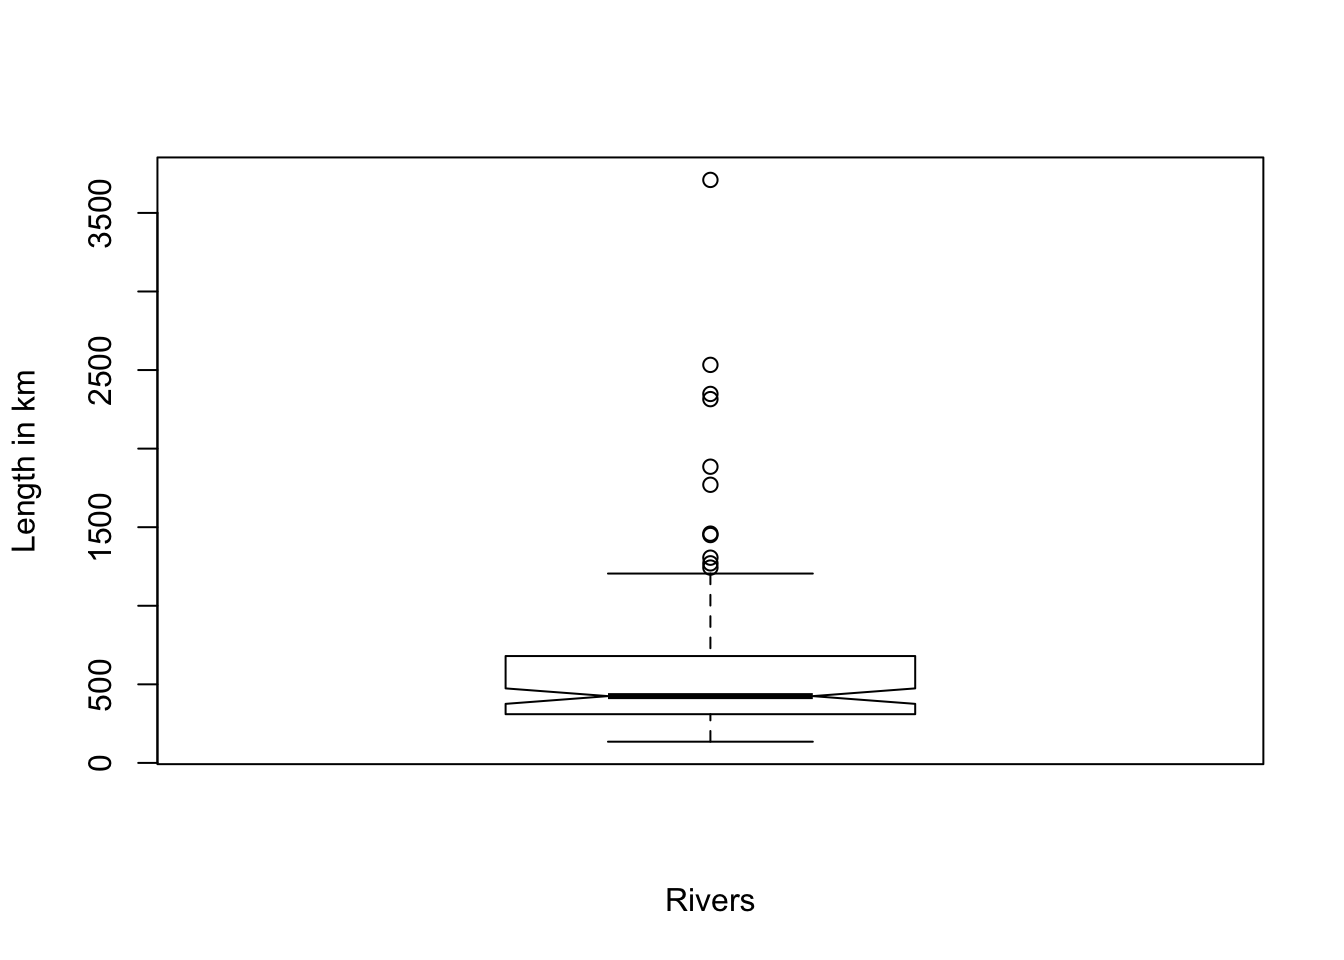 Demonstration of the build-in R function `boxplot(x)` with the rivers data = length of rivers